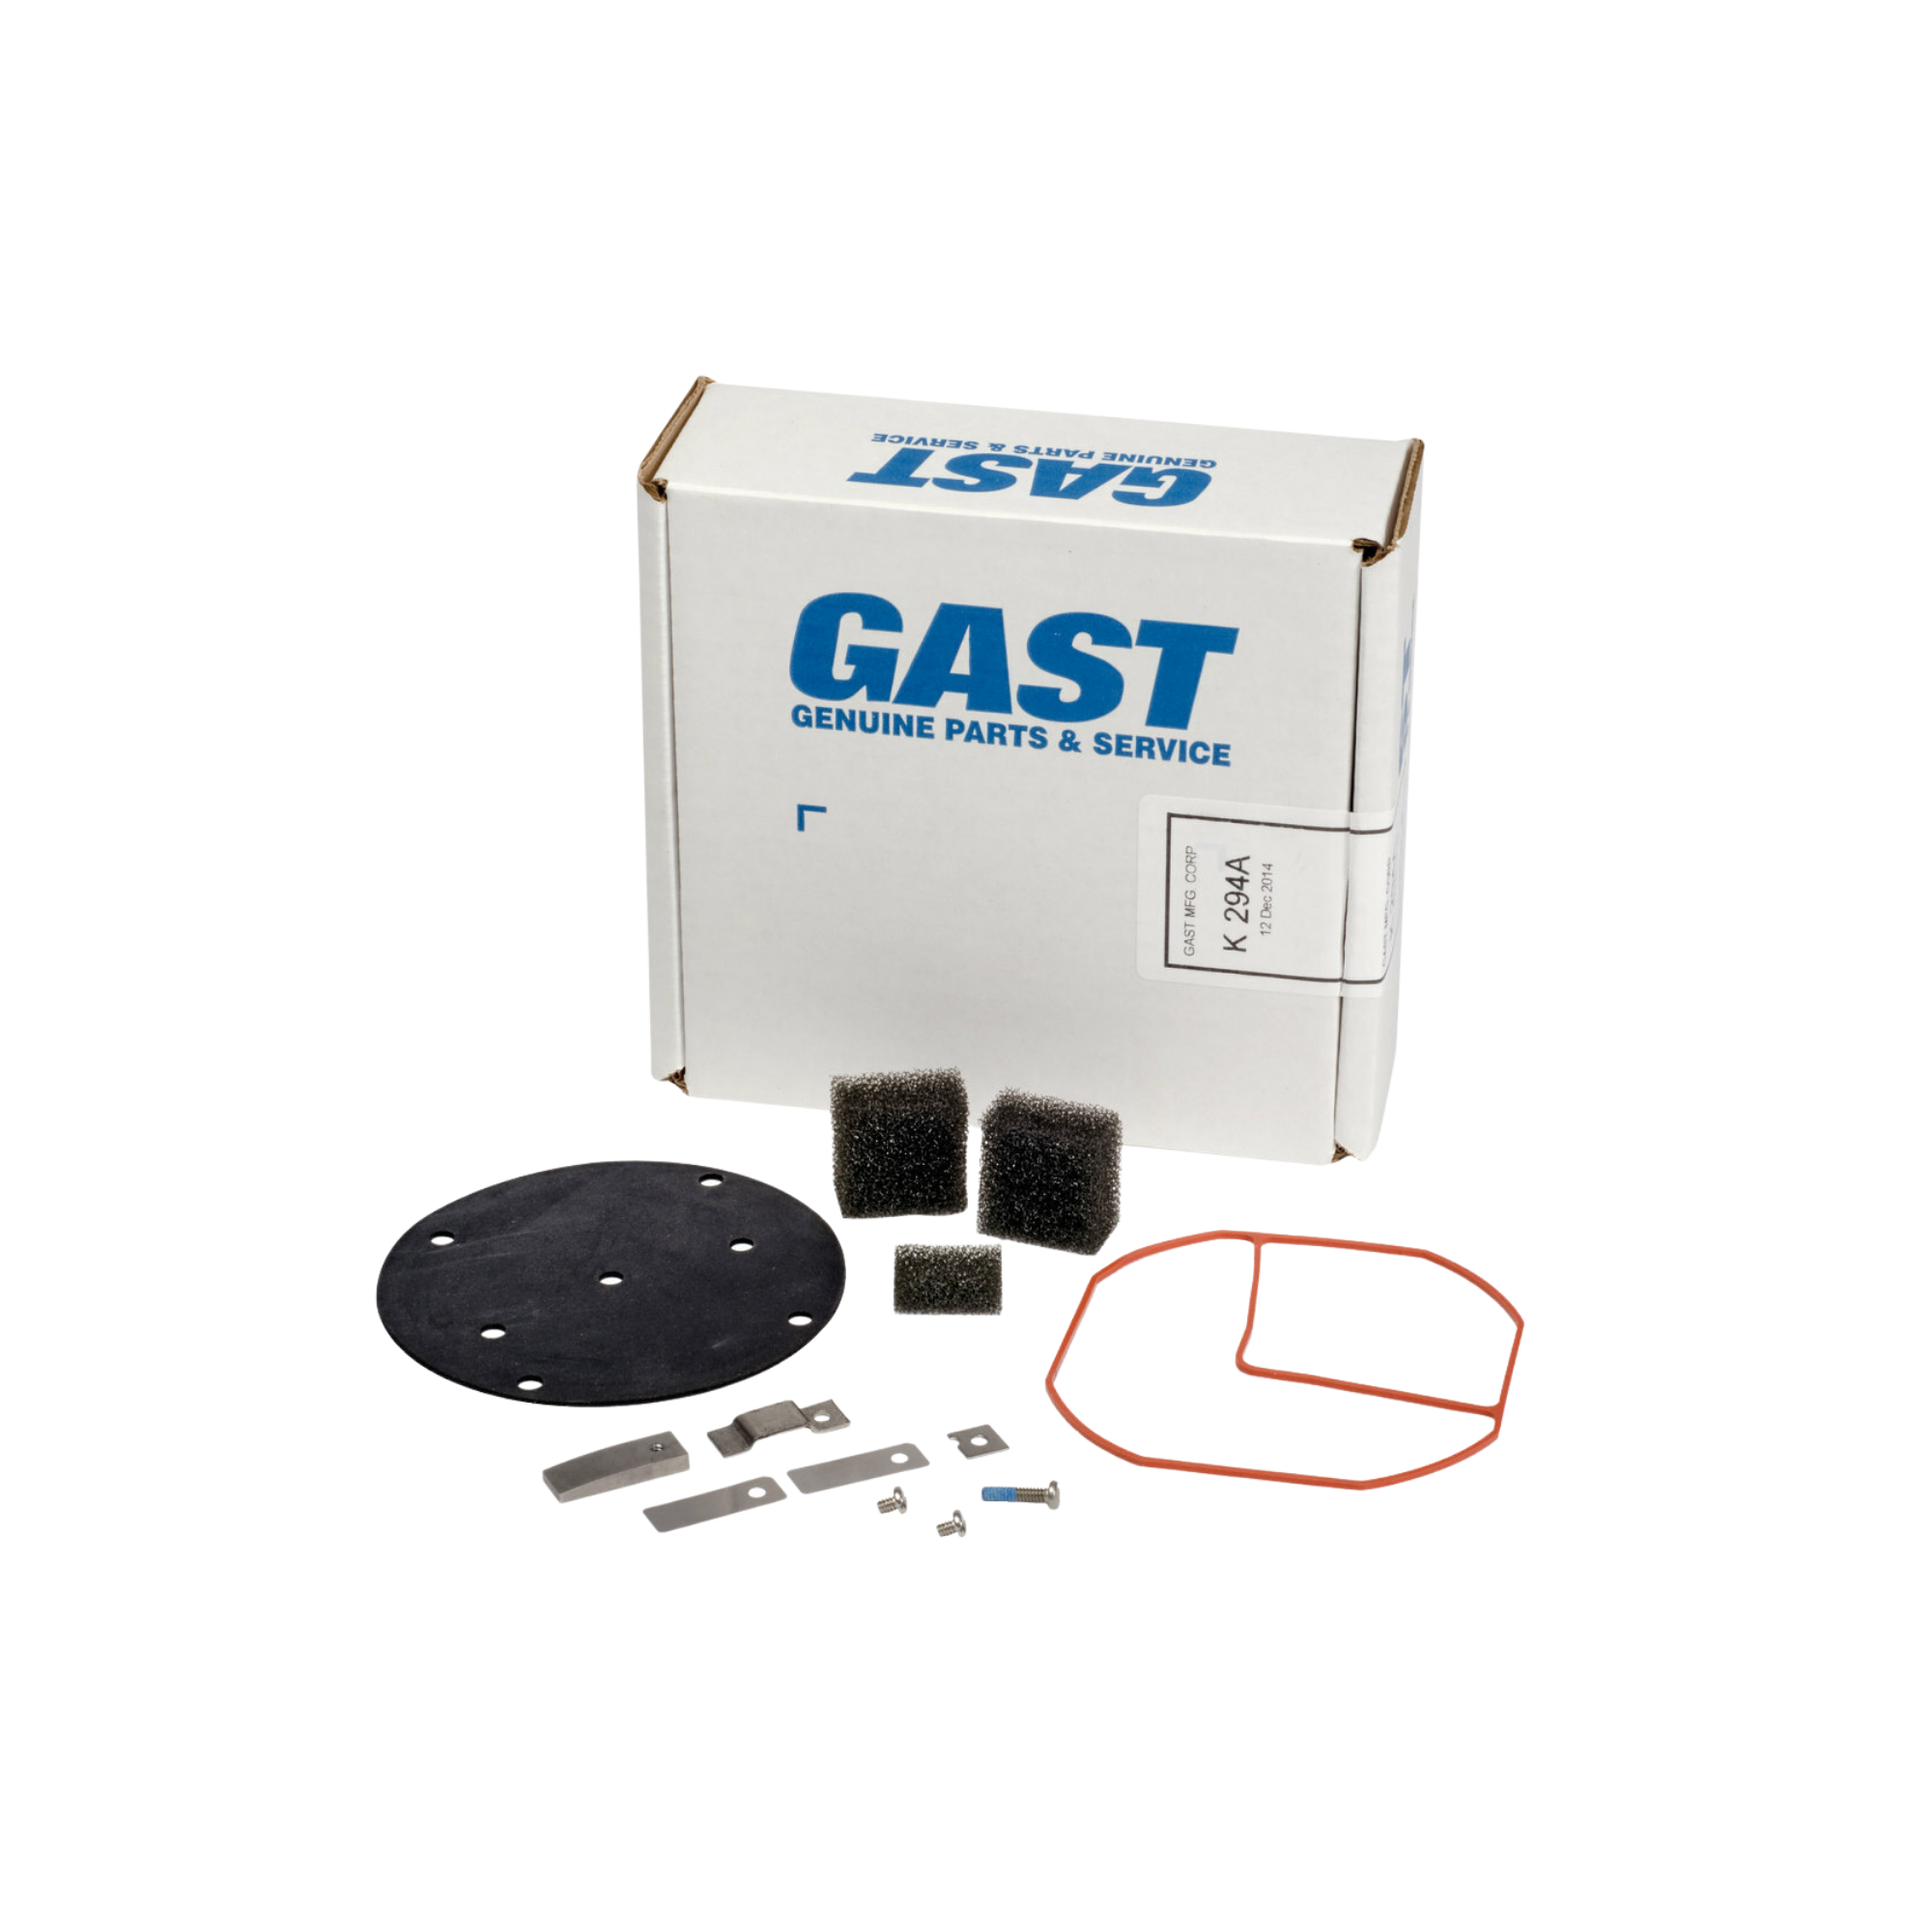 a Gast repair kit with gaskets, filters, screws, and a square white Gast box